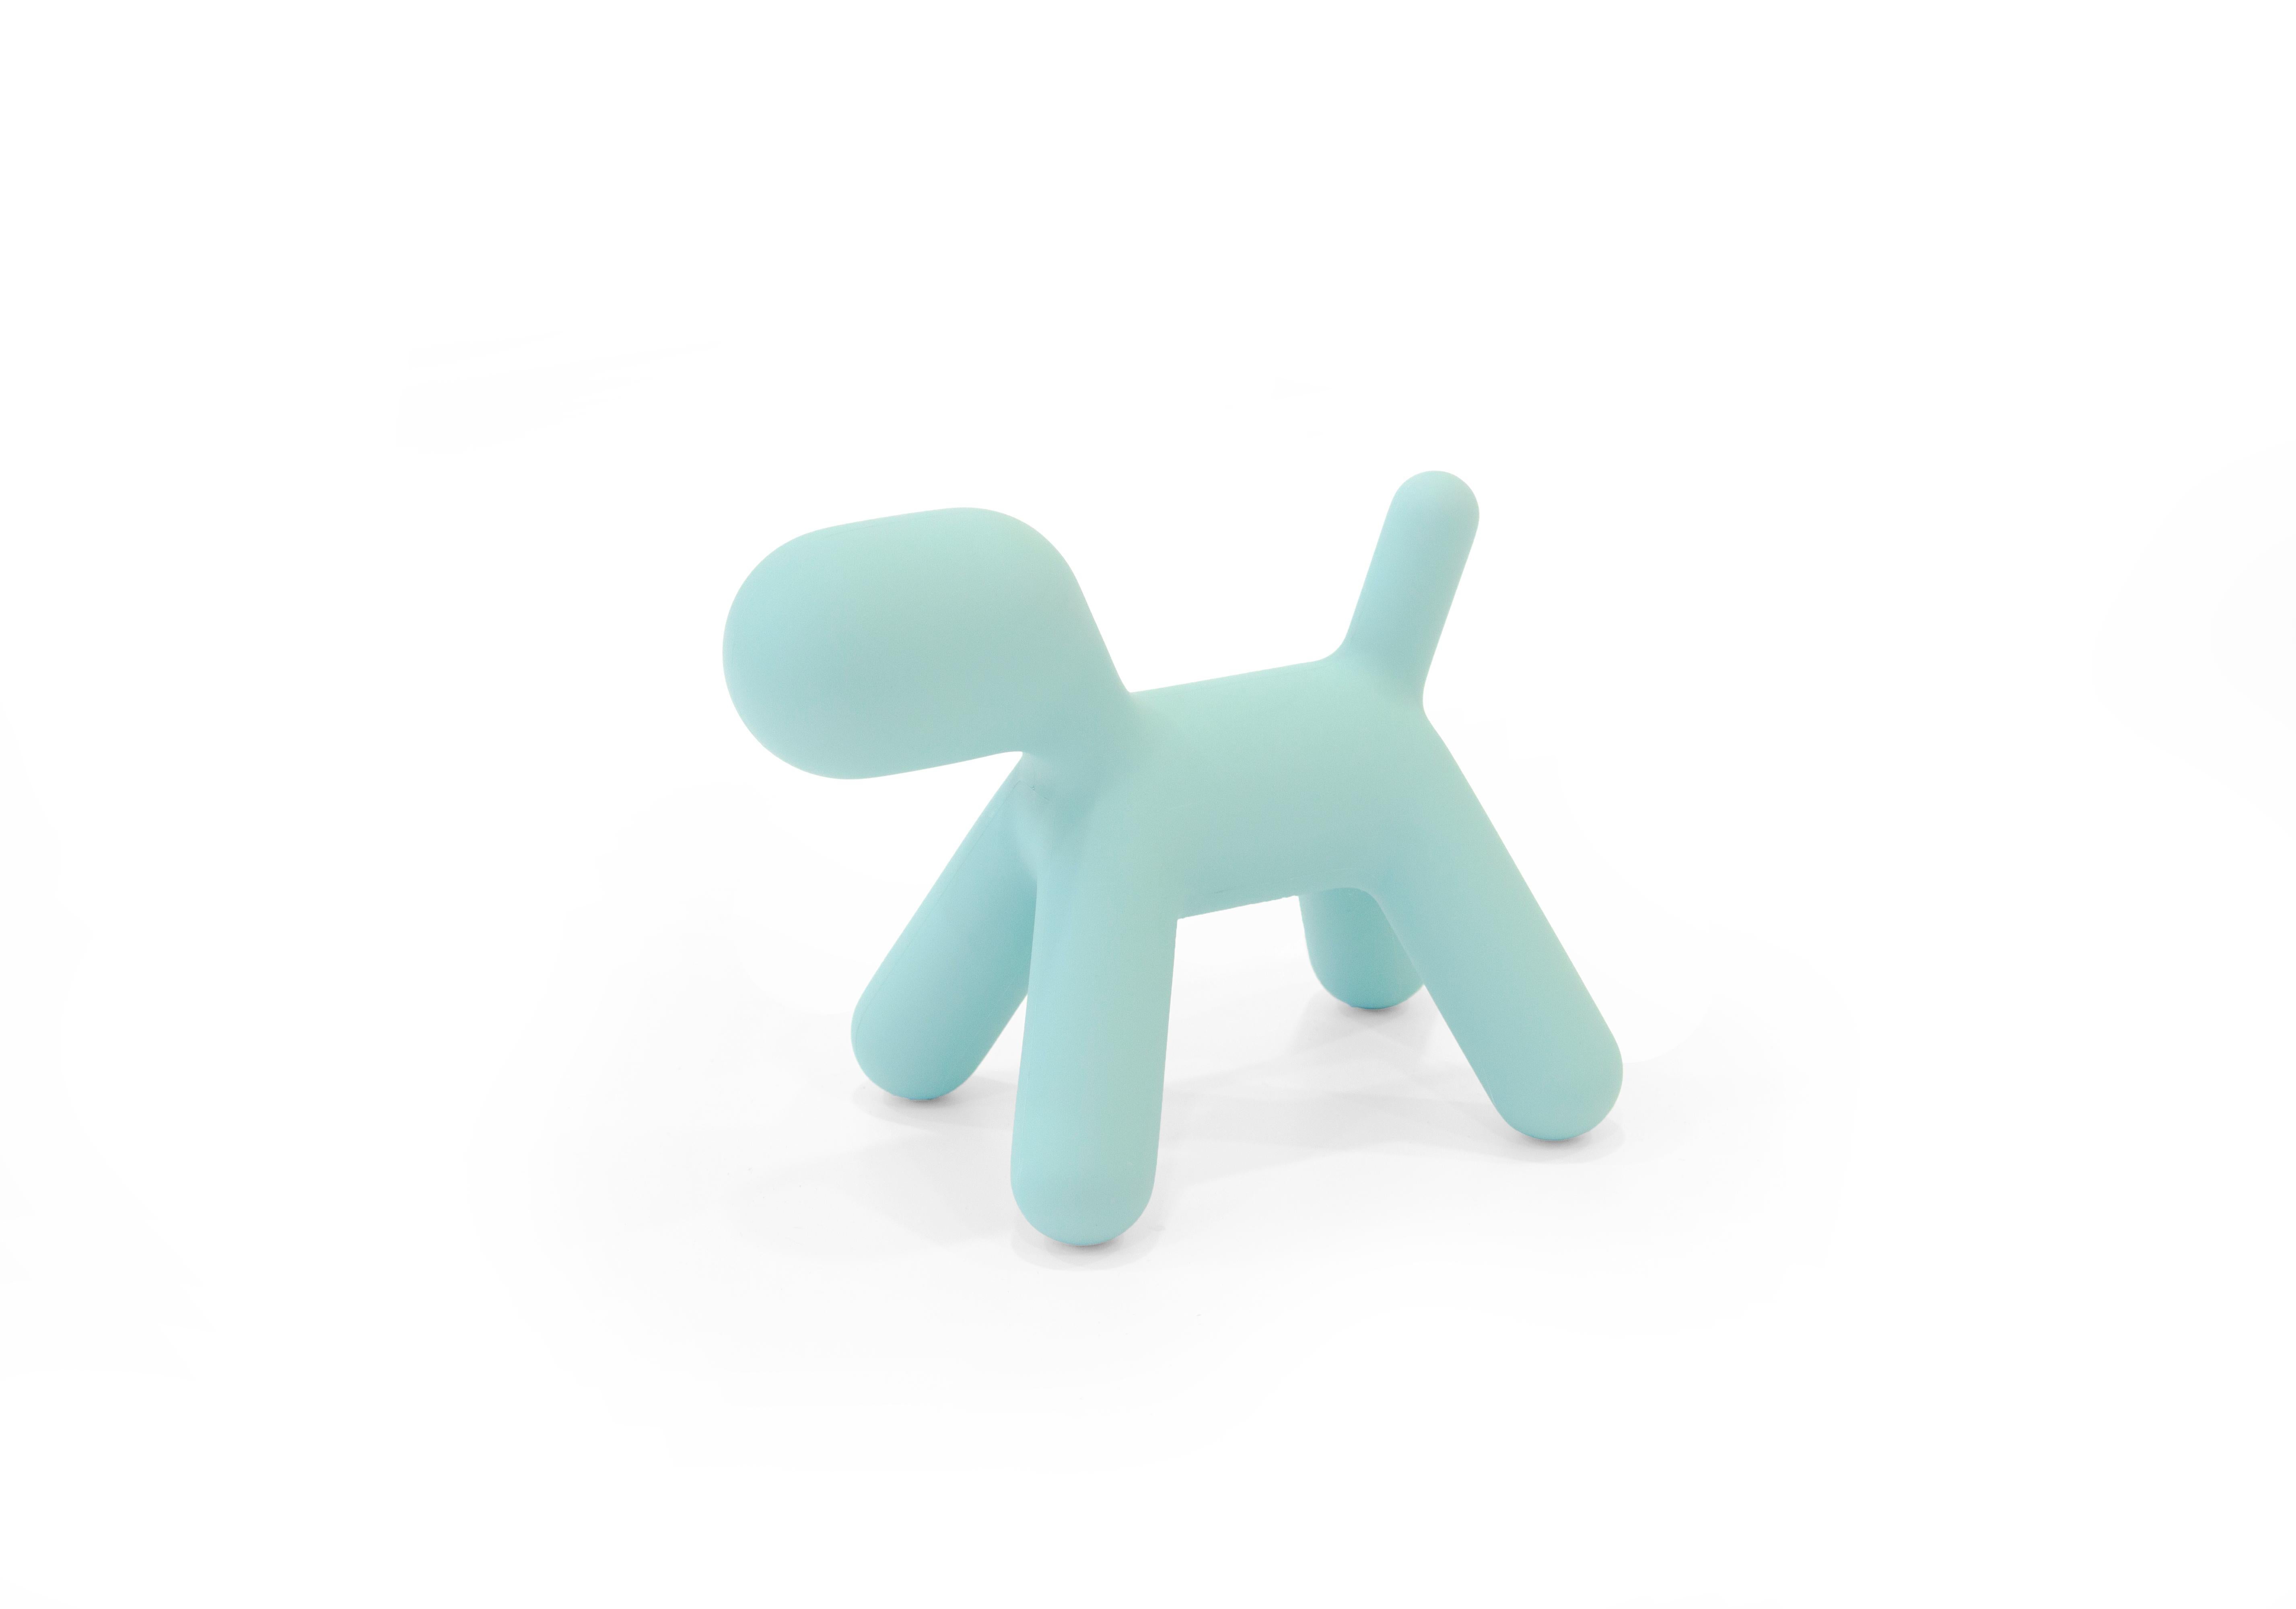 Plastic Puppy S in White by Eero Aarnio for Magis For Sale